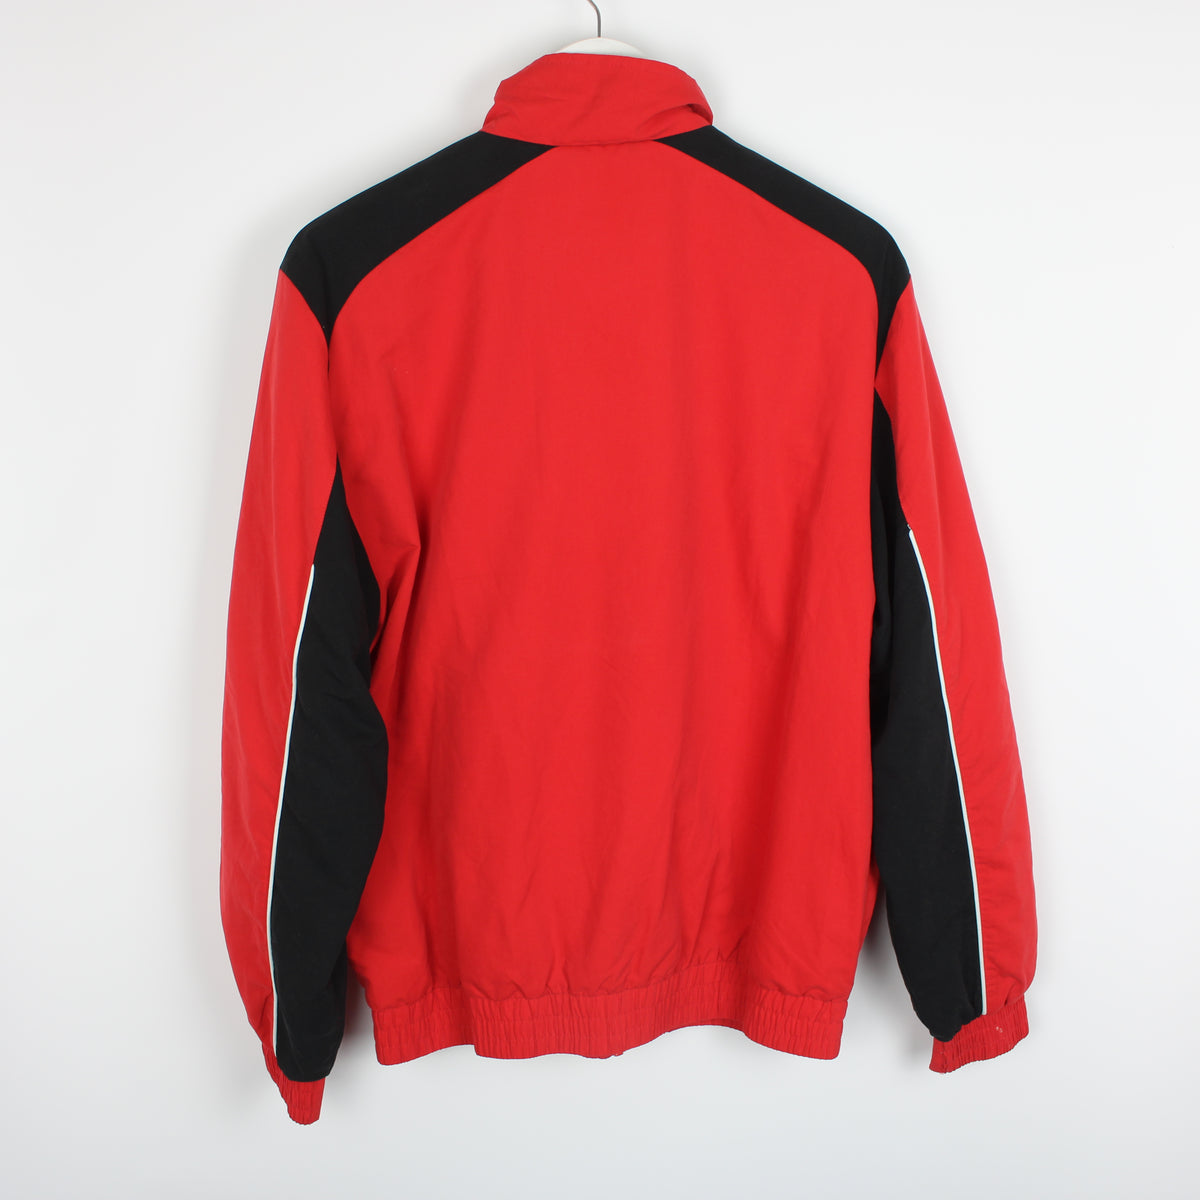 Buy 2014/15 Lucchese 1905 Training Jacket (Excellent) - L - Retro ...